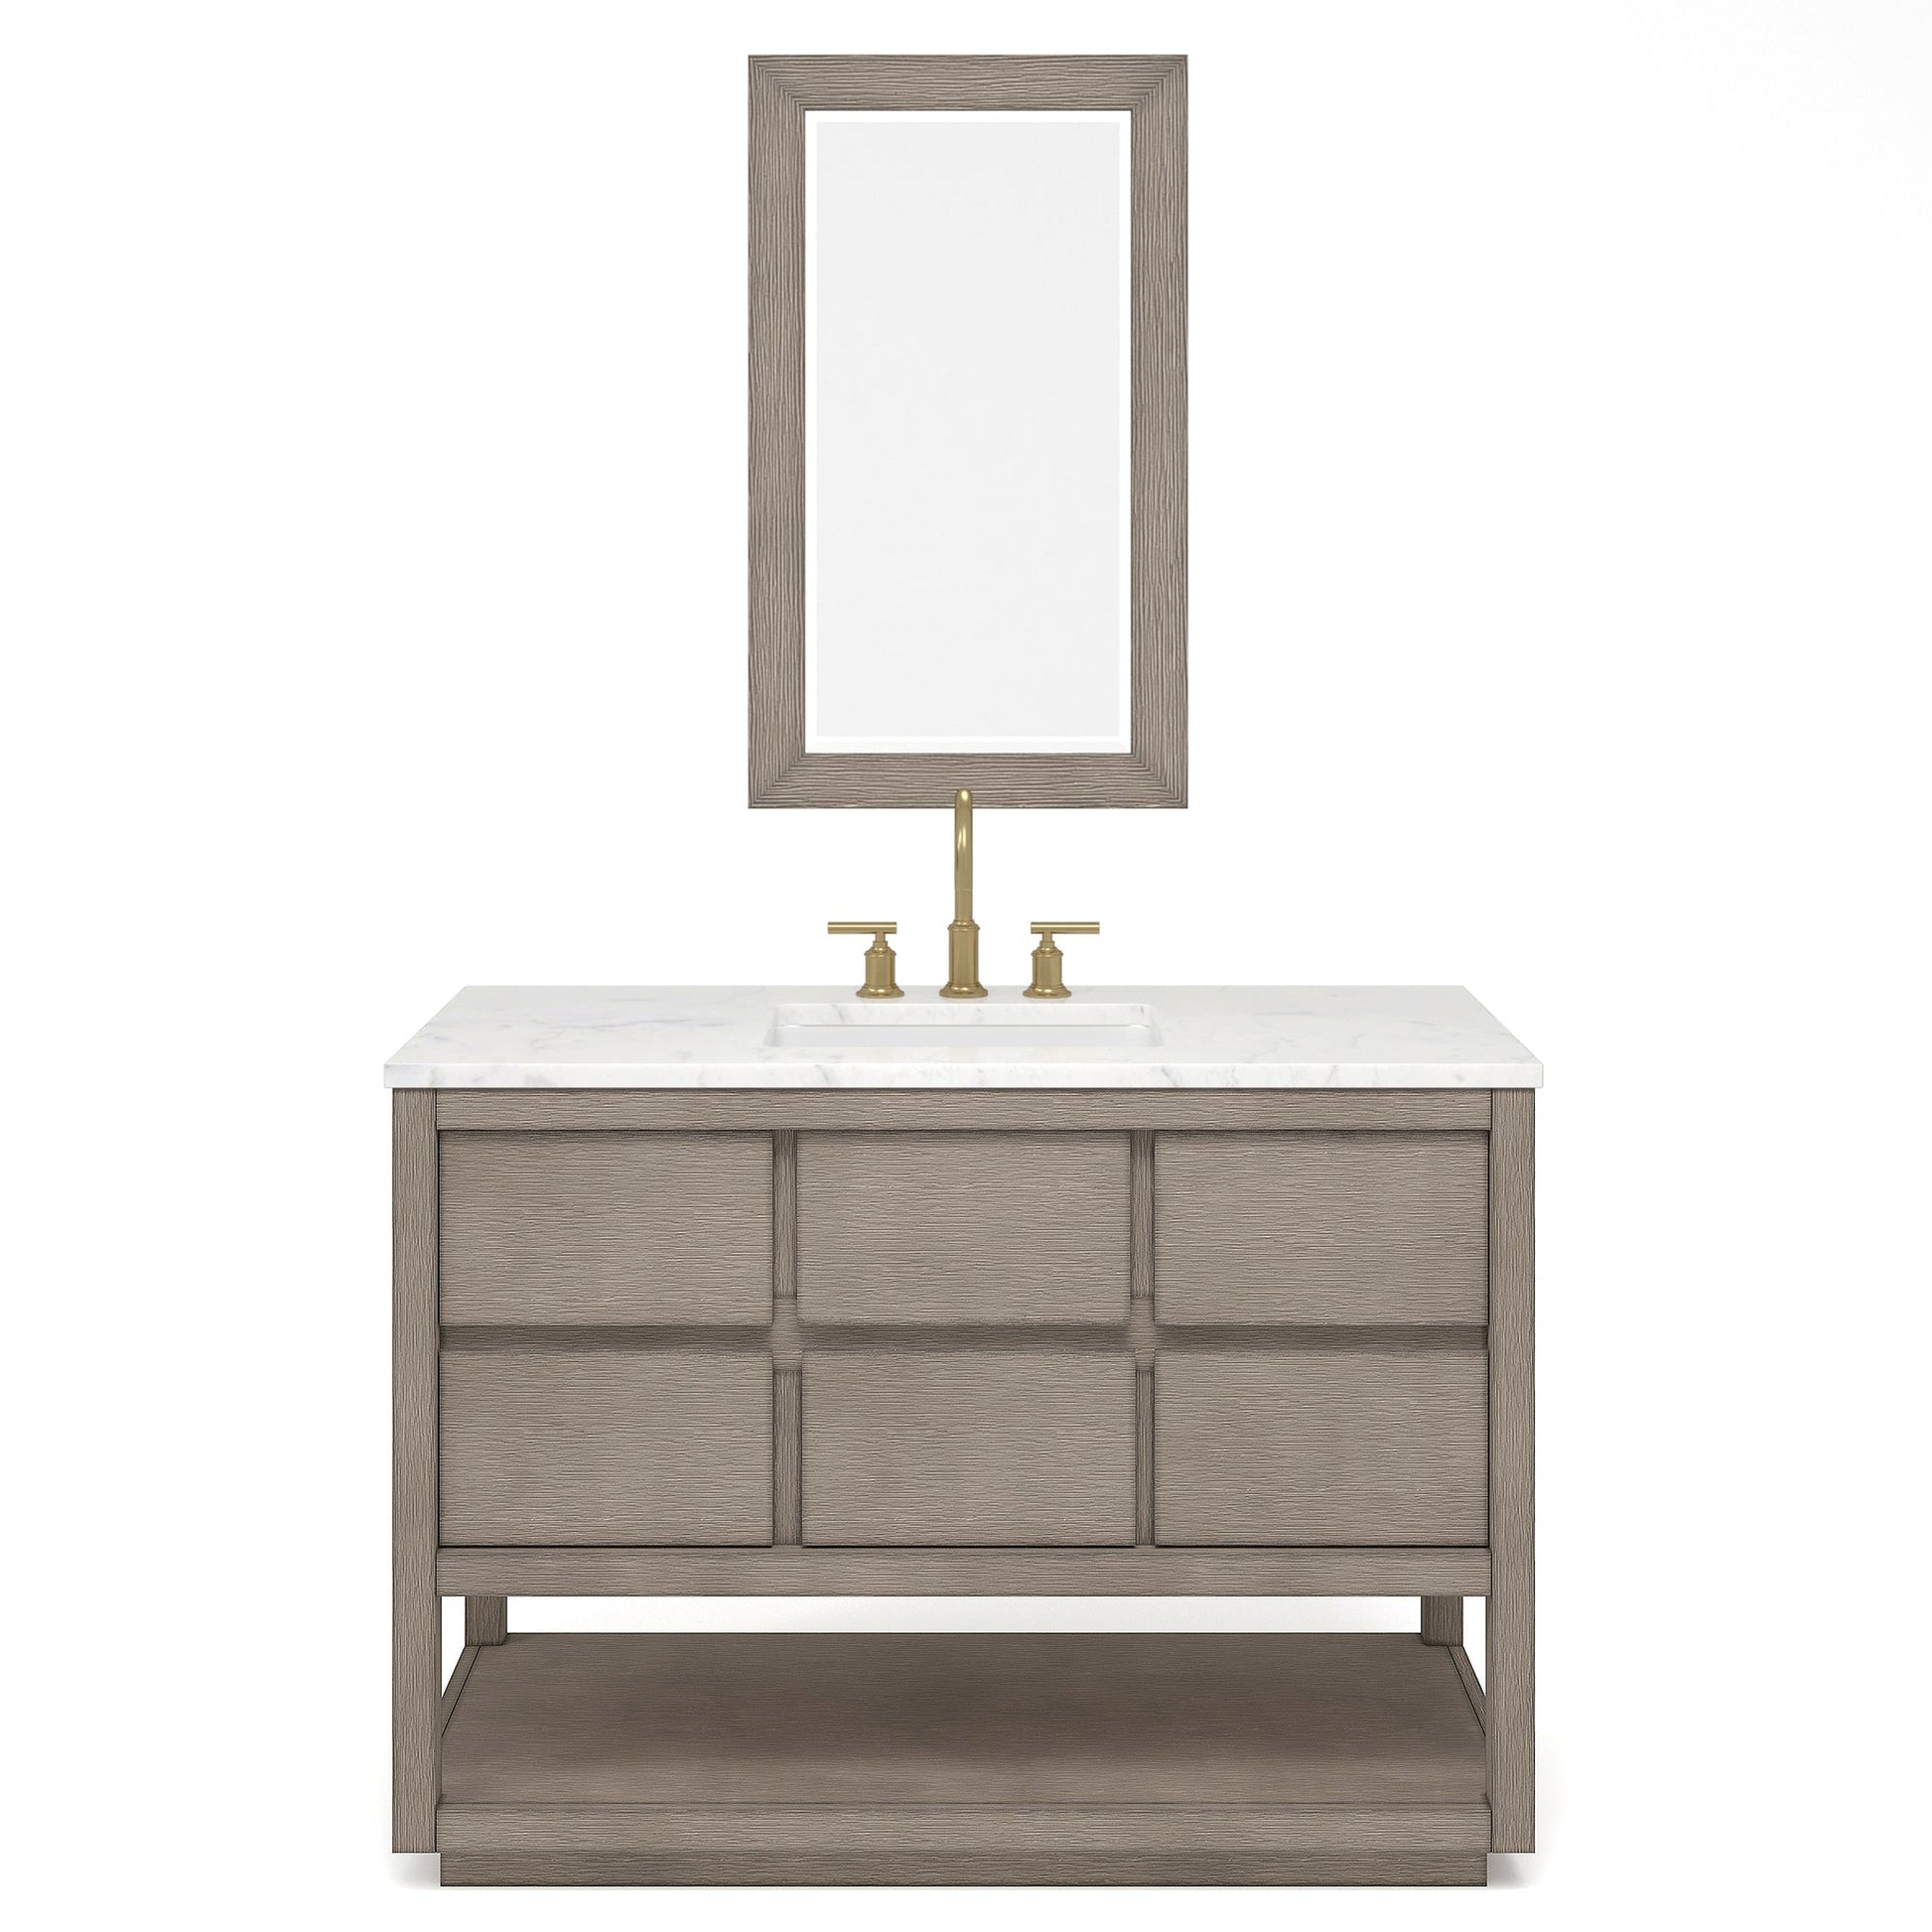 Water Creation Oakman 48" Single Sink Carrara White Marble Countertop Bath Vanity in Grey Oak with Gold Faucets and Rectangular Mirrors